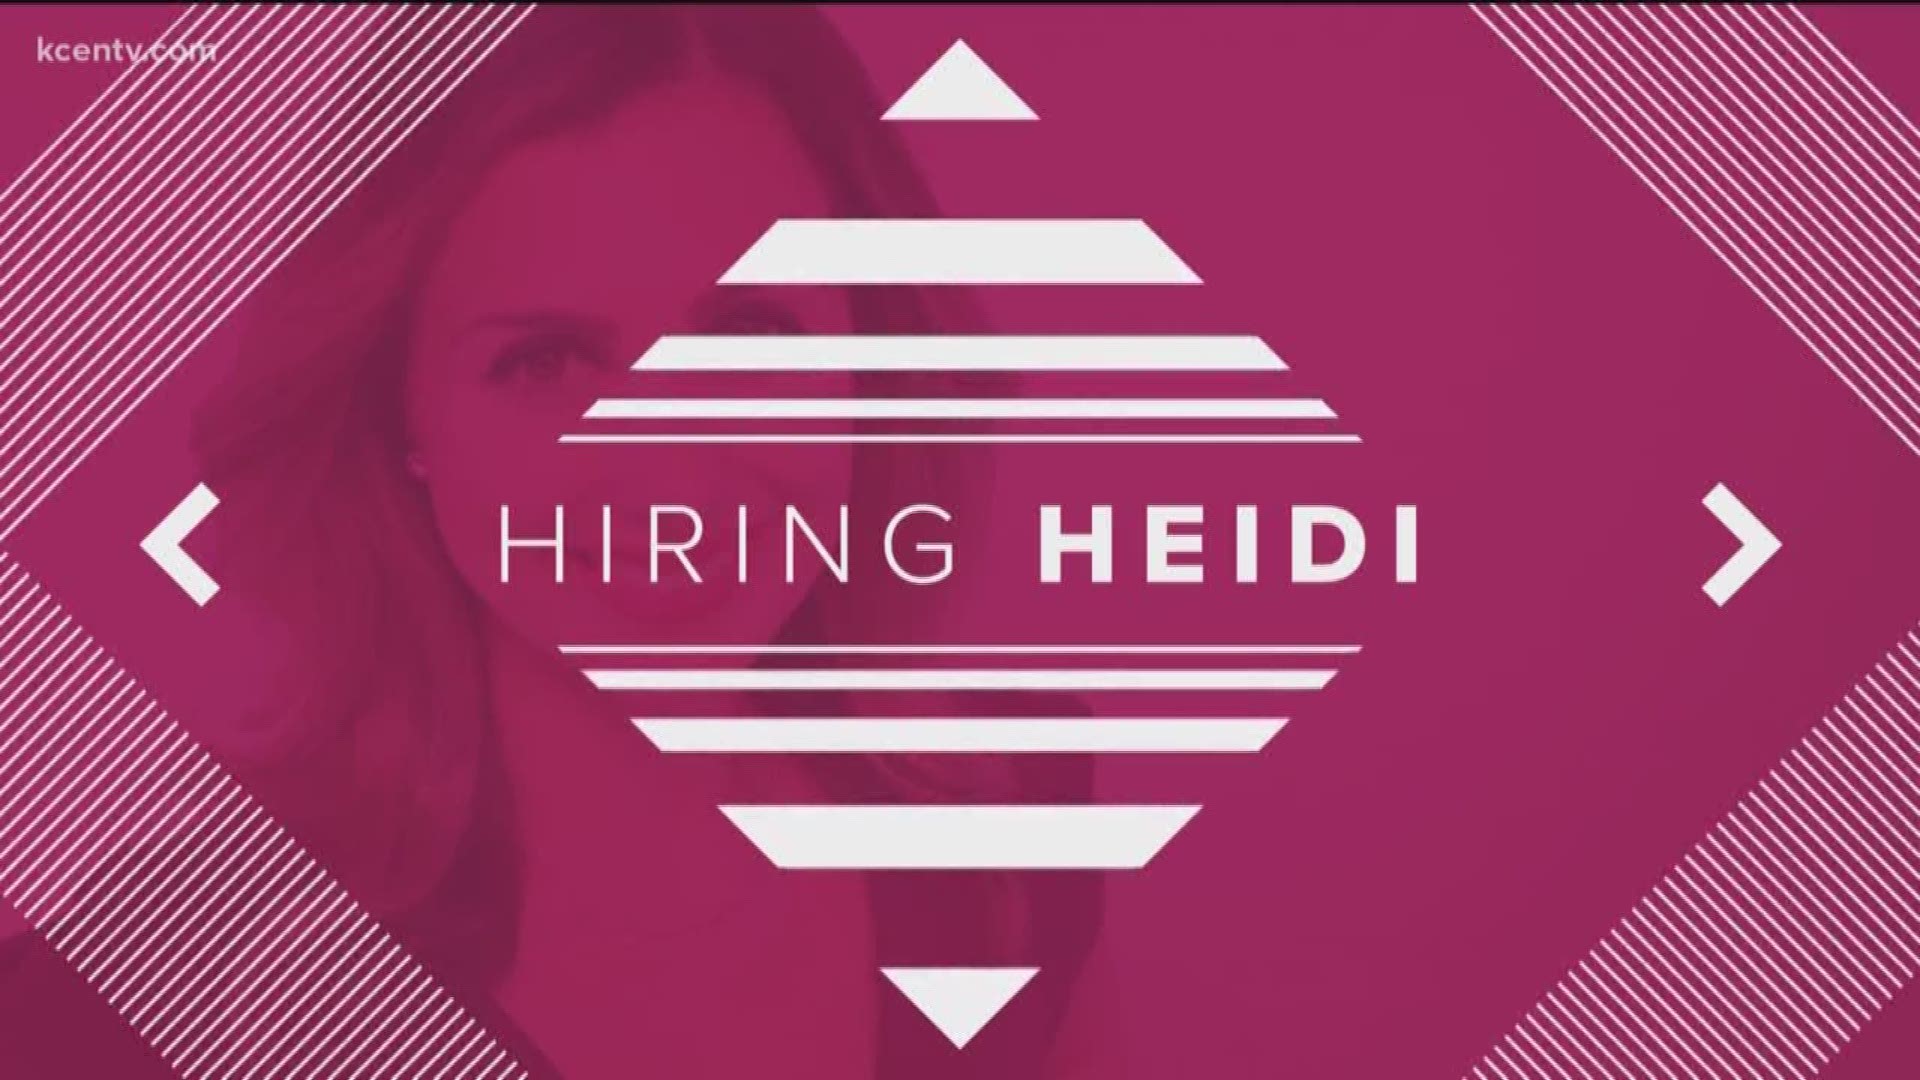 Heidi is making signs at Fastsigns. Will her sign come out perfect? Will she get hired or fired? Find out on this weeks Hiring Heidi.